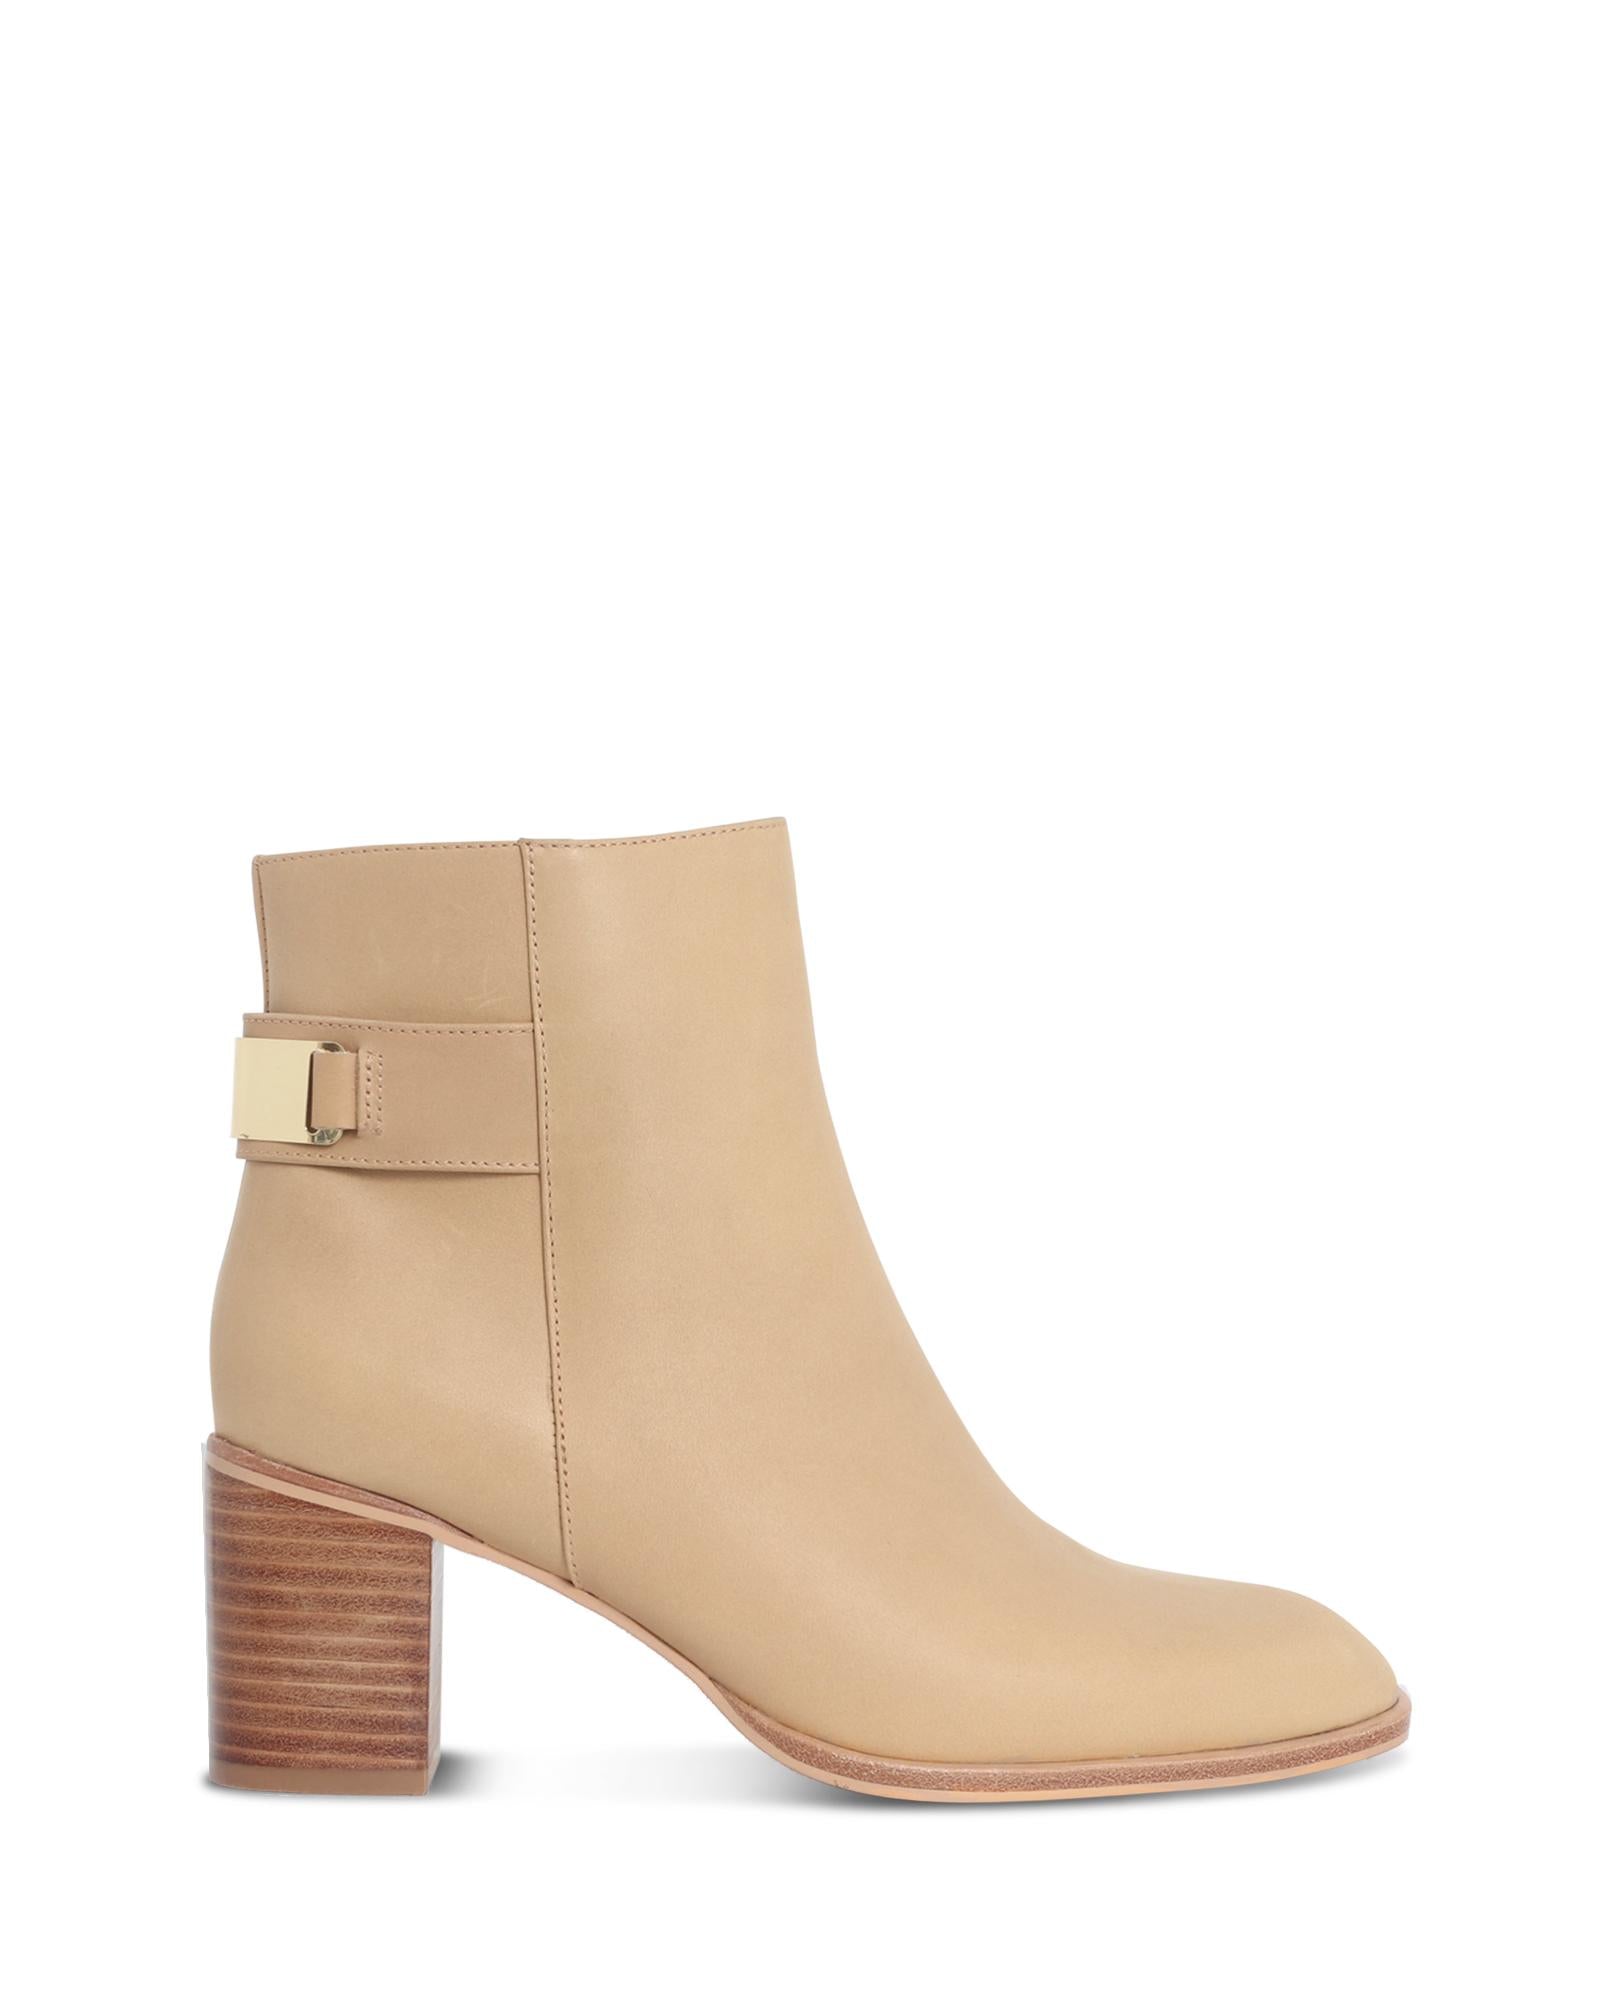 Elsie Nude 7cm Heel Ankle Boot with Gold Detailing